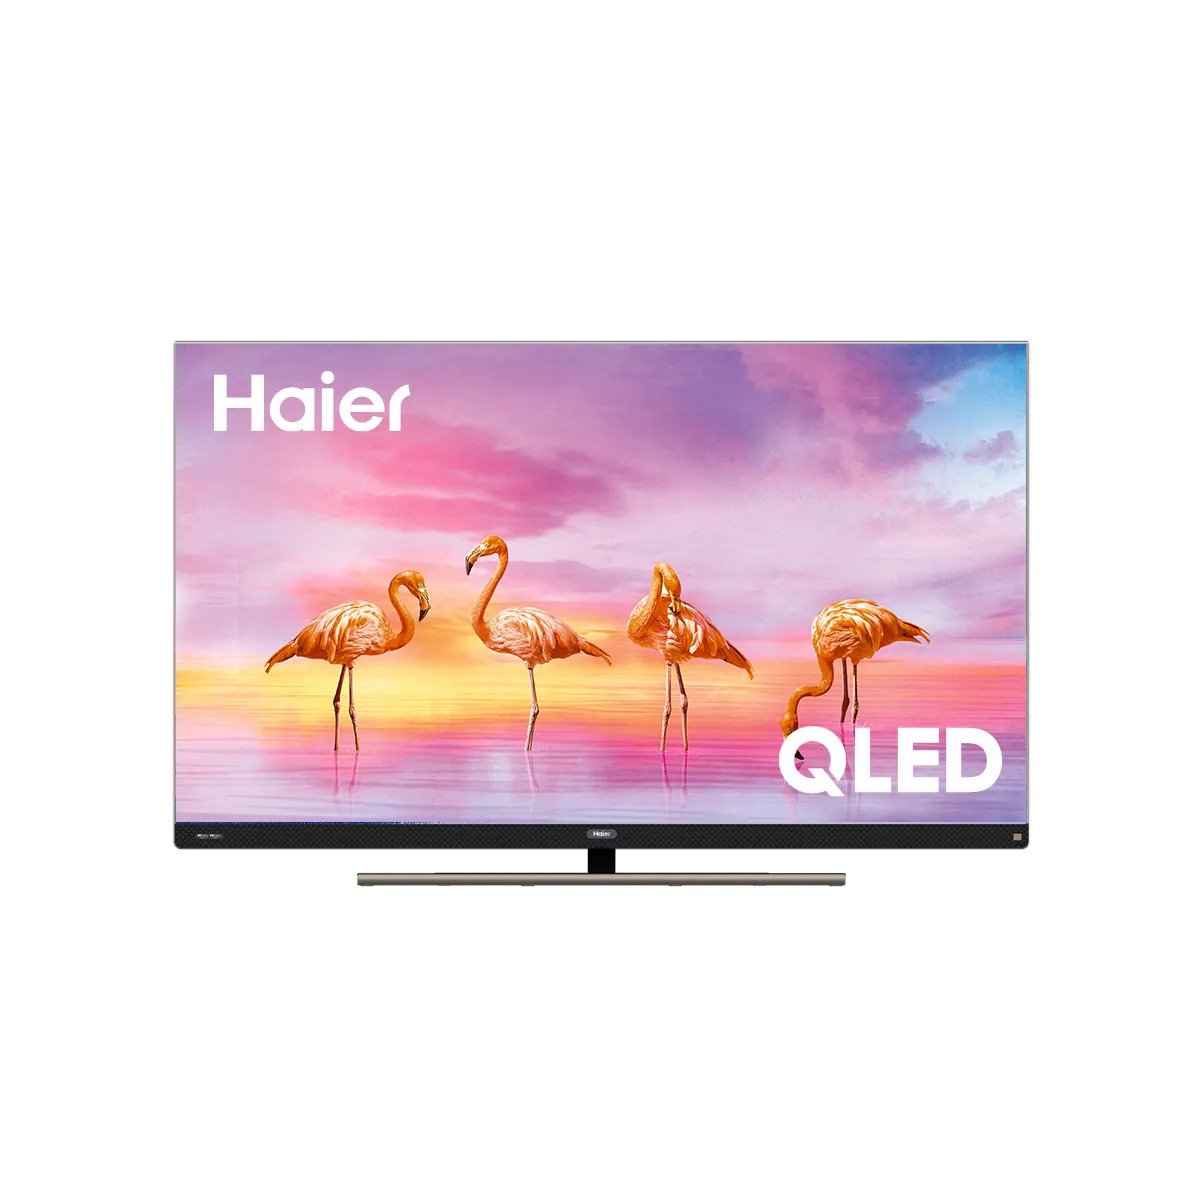 Haier 65 Inch Smart TV, QLED 4K HDR UHD 120Hz GOOGLE TV, With Dolby Vision - H65S900UX